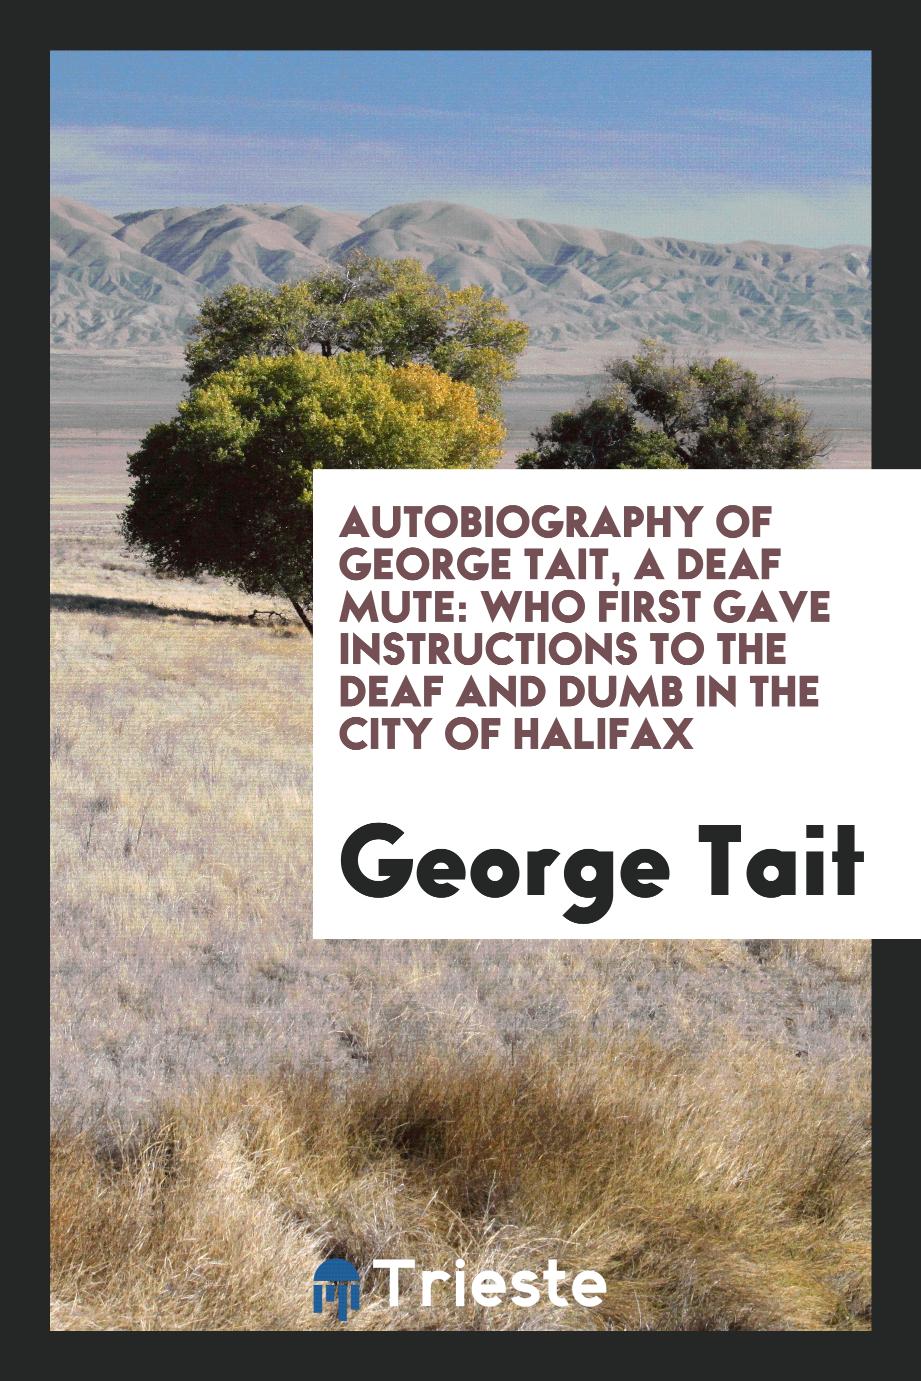 Autobiography of George Tait, a Deaf Mute: Who First Gave Instructions to the Deaf and Dumb in the city of halifax